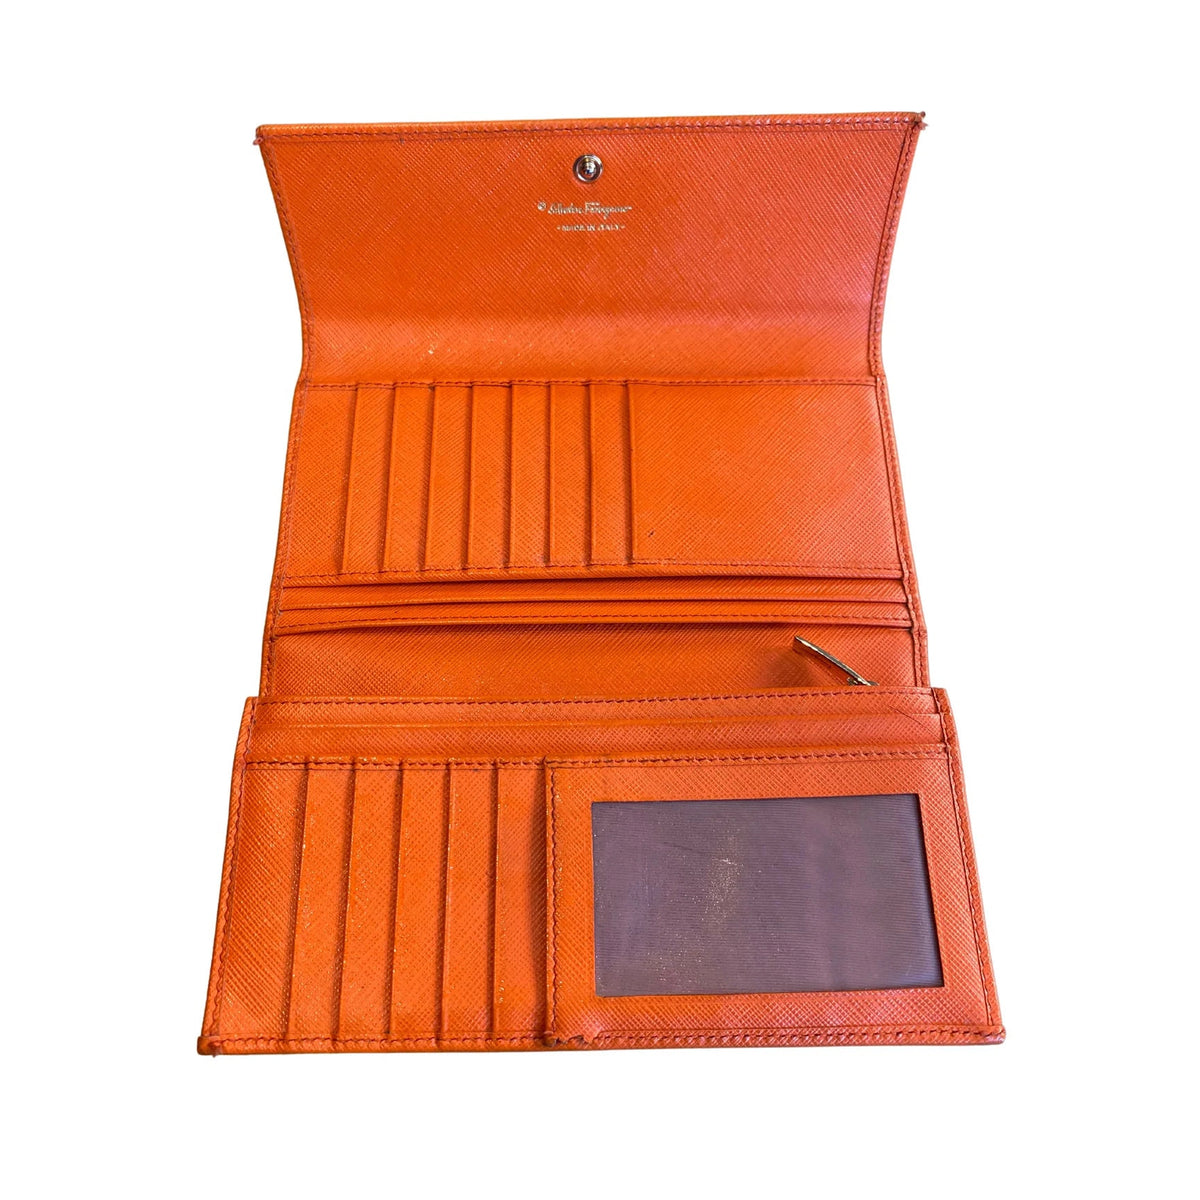 Pre-Owned FERRAGAMO Leather Continental Wallet - theREMODA